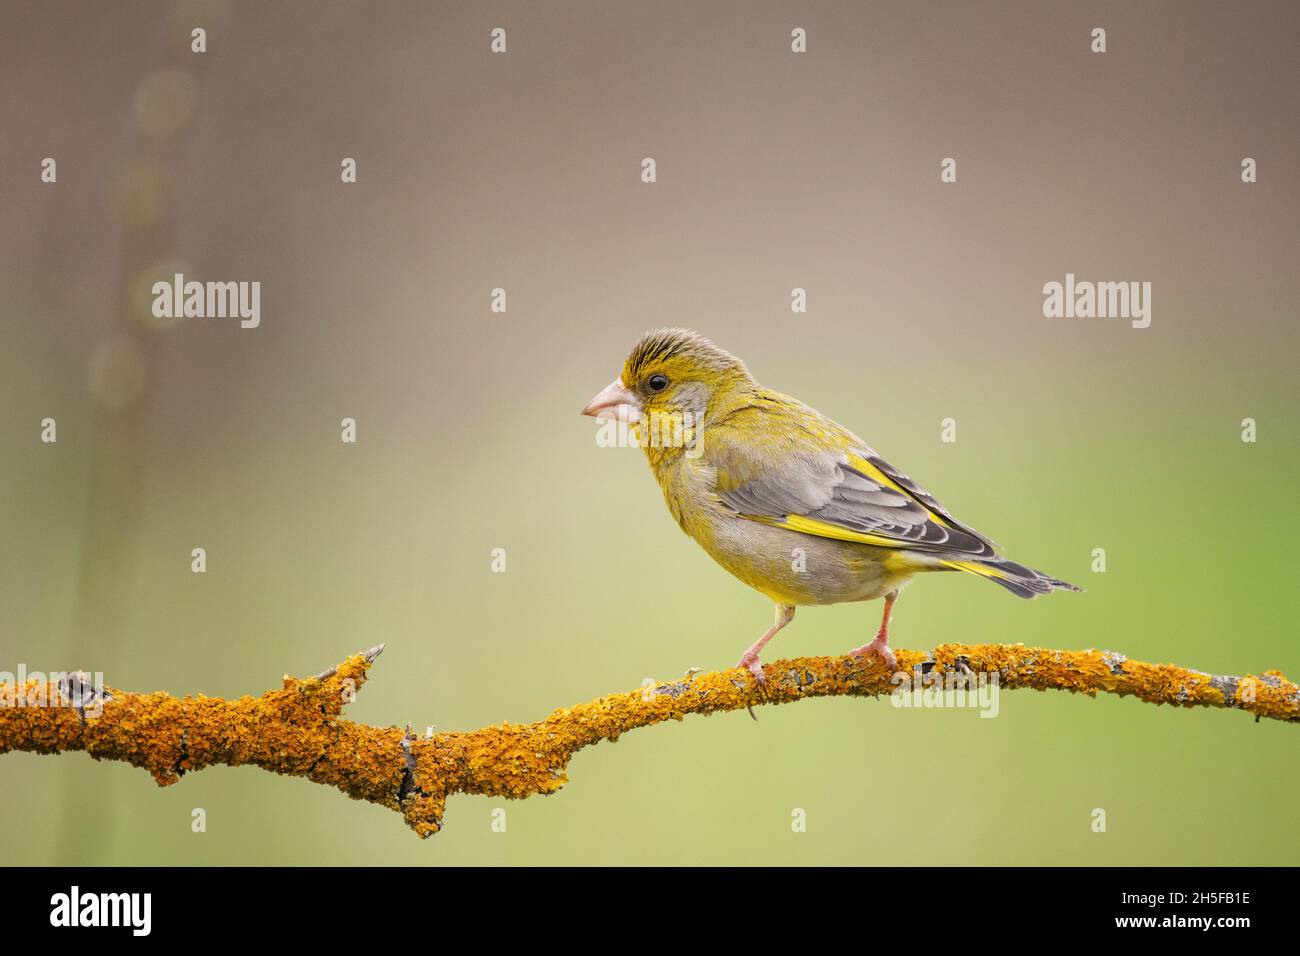 European Greenfinch Carduelis chloris. Greenfinch sits on branch. Stock Photo